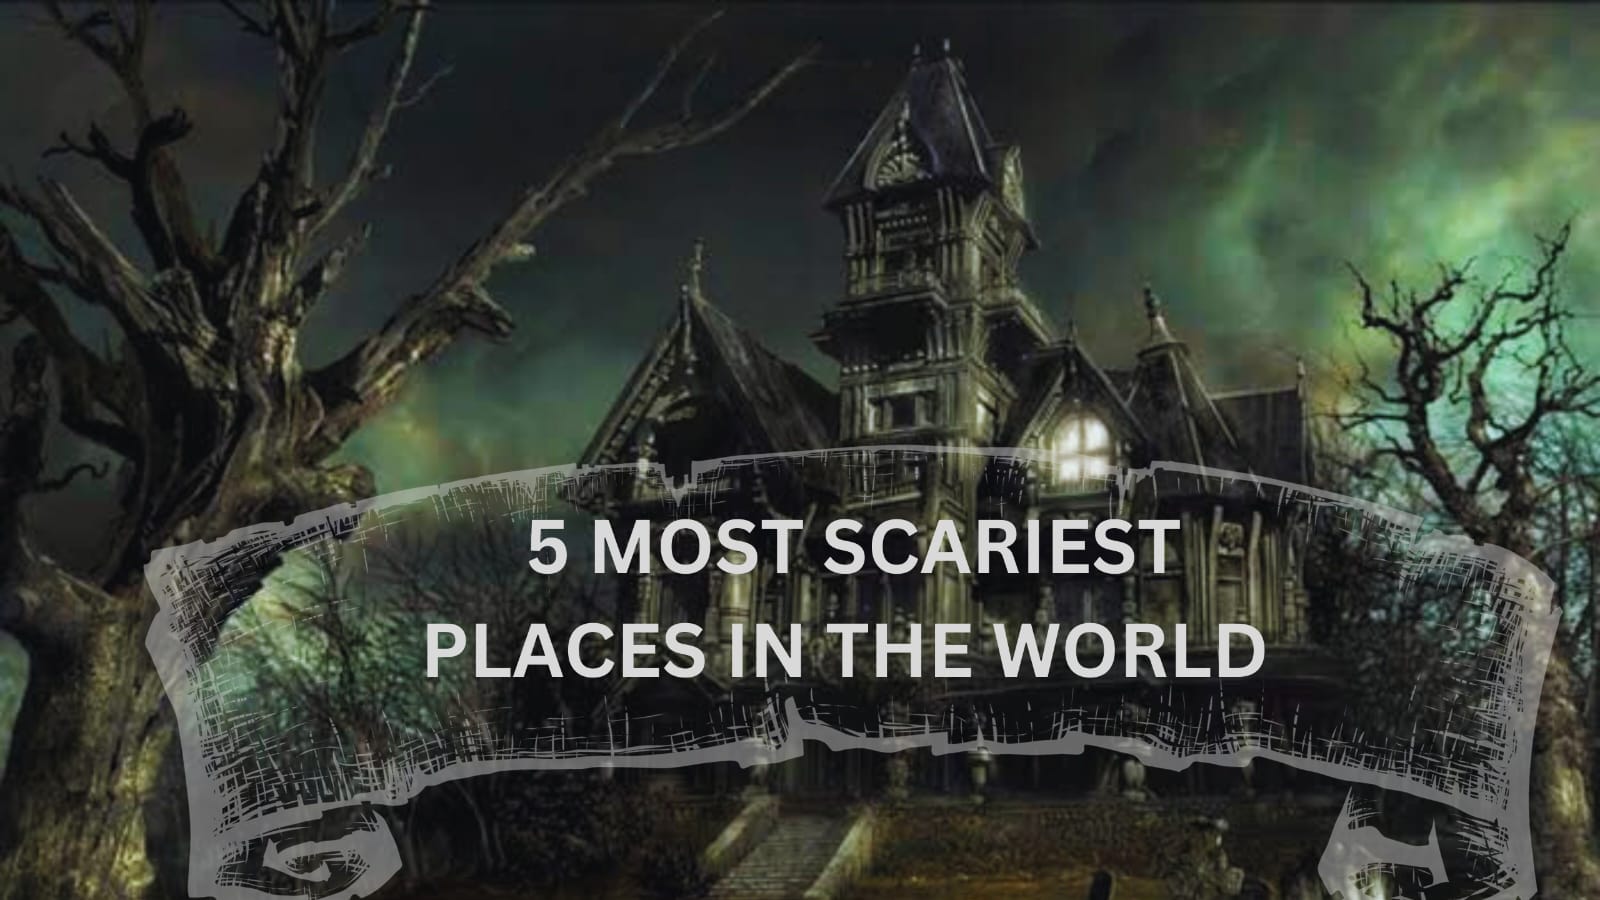 5 MOST SCARIEST PLACE IN THE WORLD